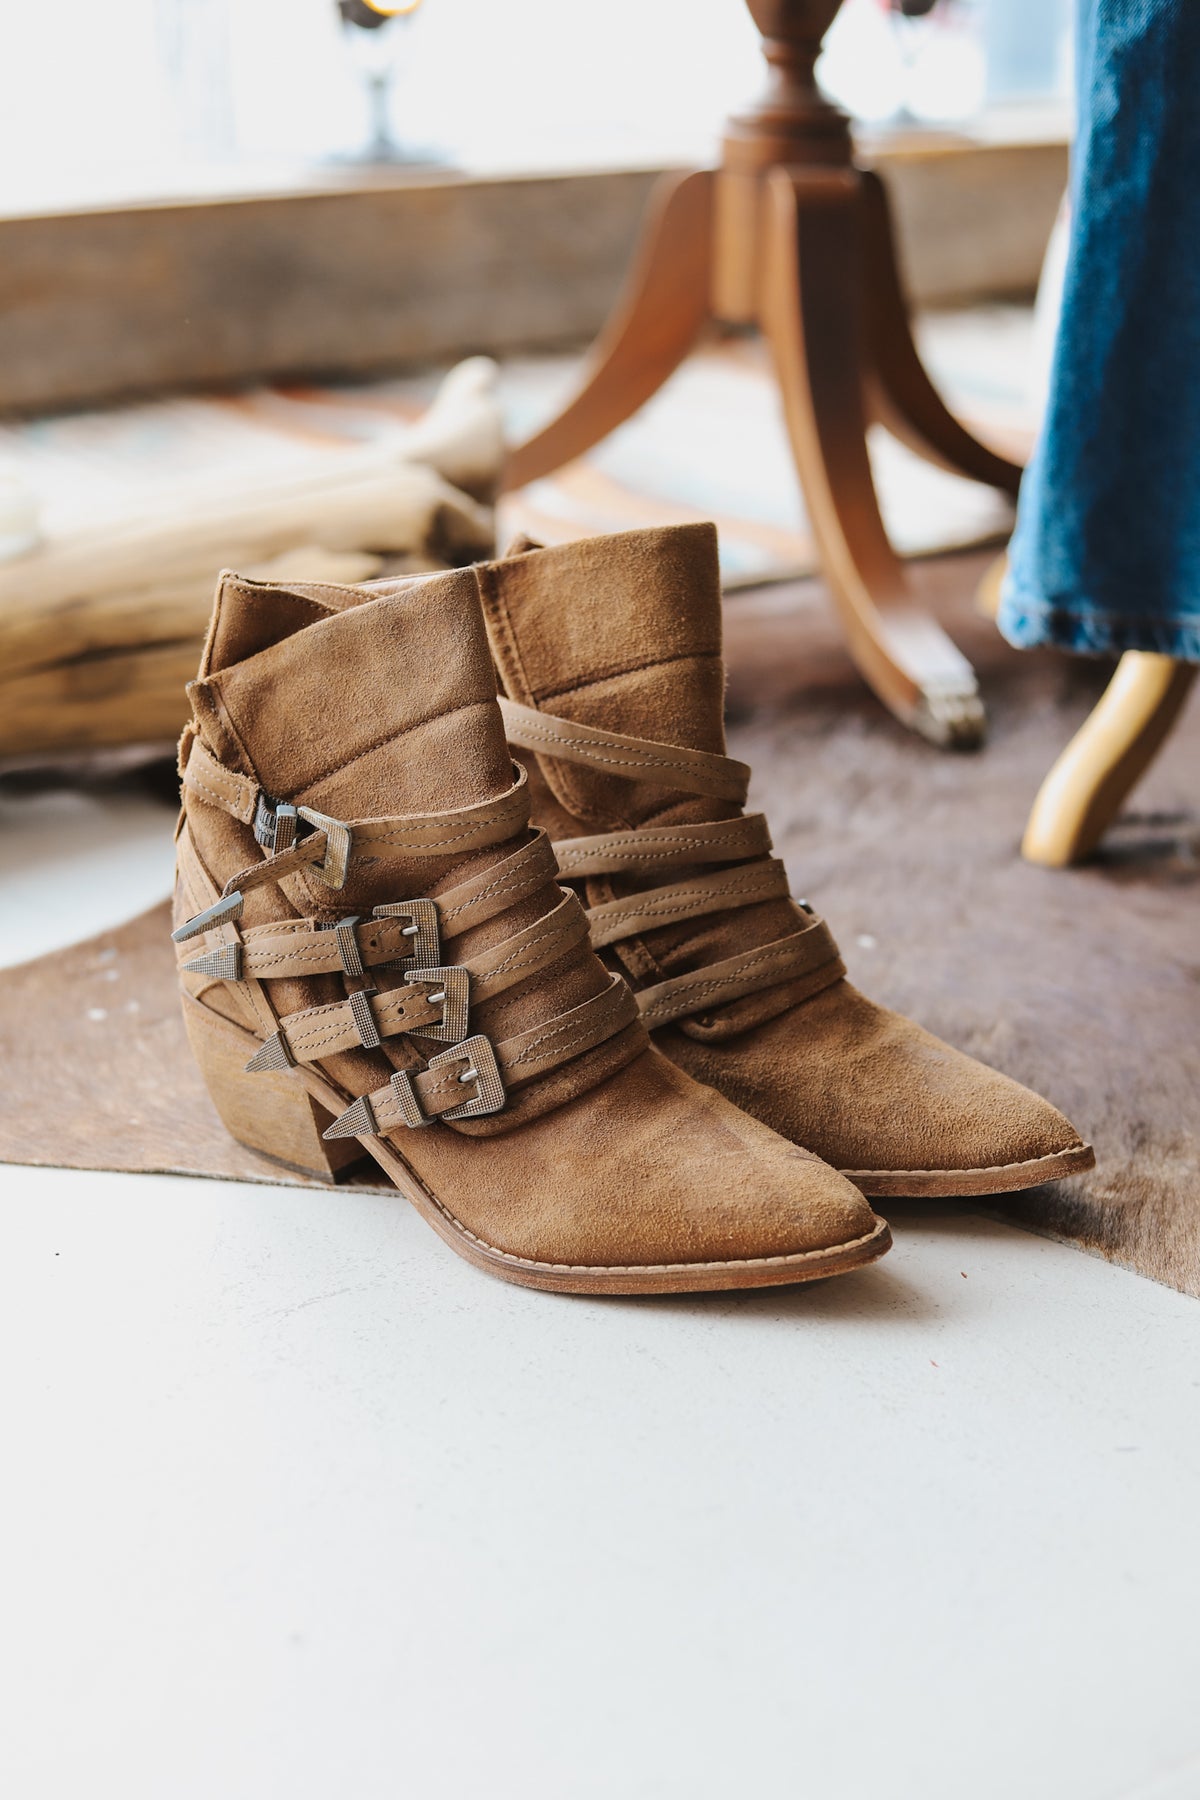 ReWest Free People Boots - INSCH